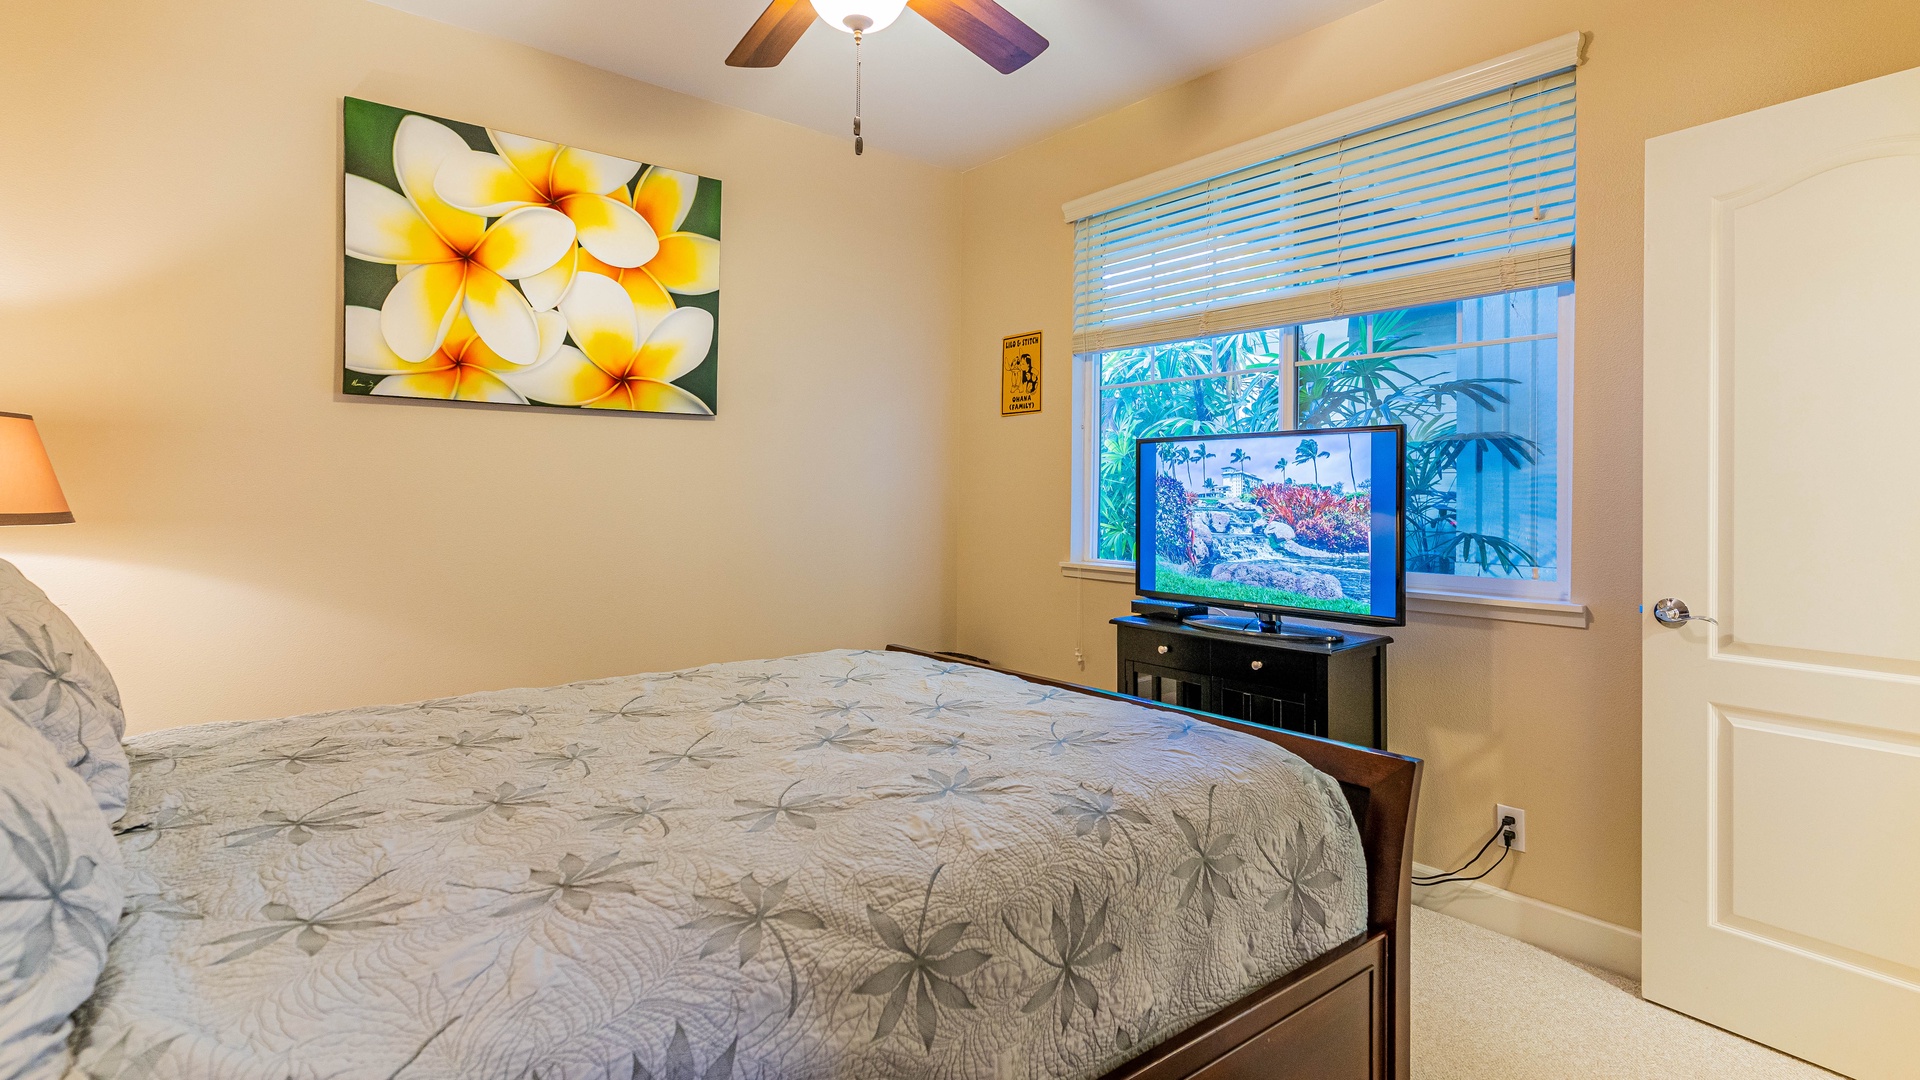 Kapolei Vacation Rentals, Ko Olina Kai 1033C - The downstairs bedroom offers a queen bed and TV.